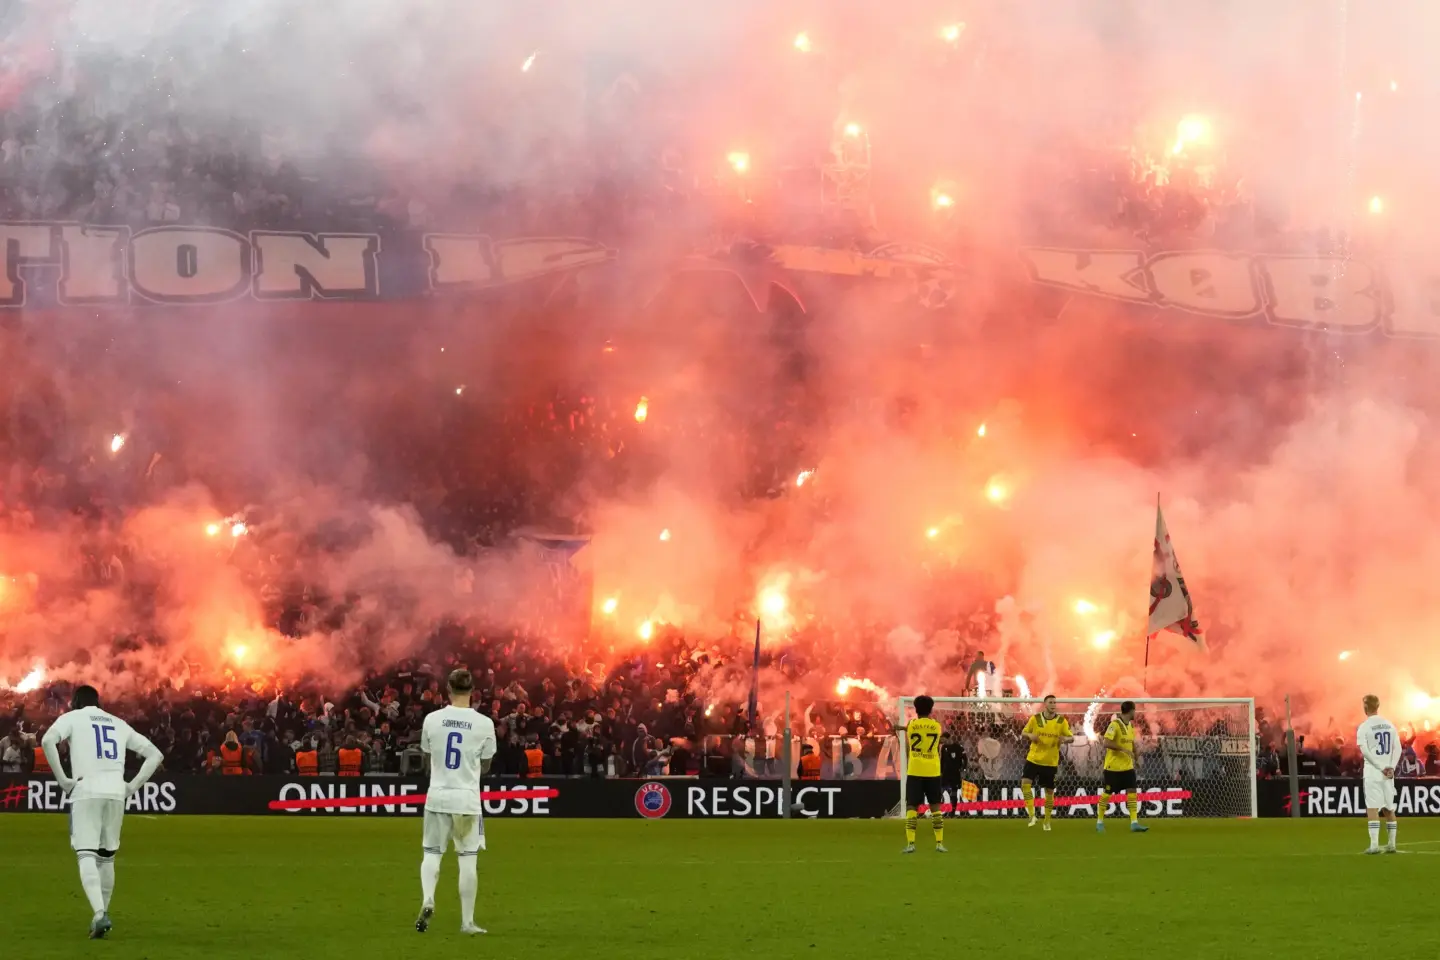 fireworks and sparklers in the crowd during football match